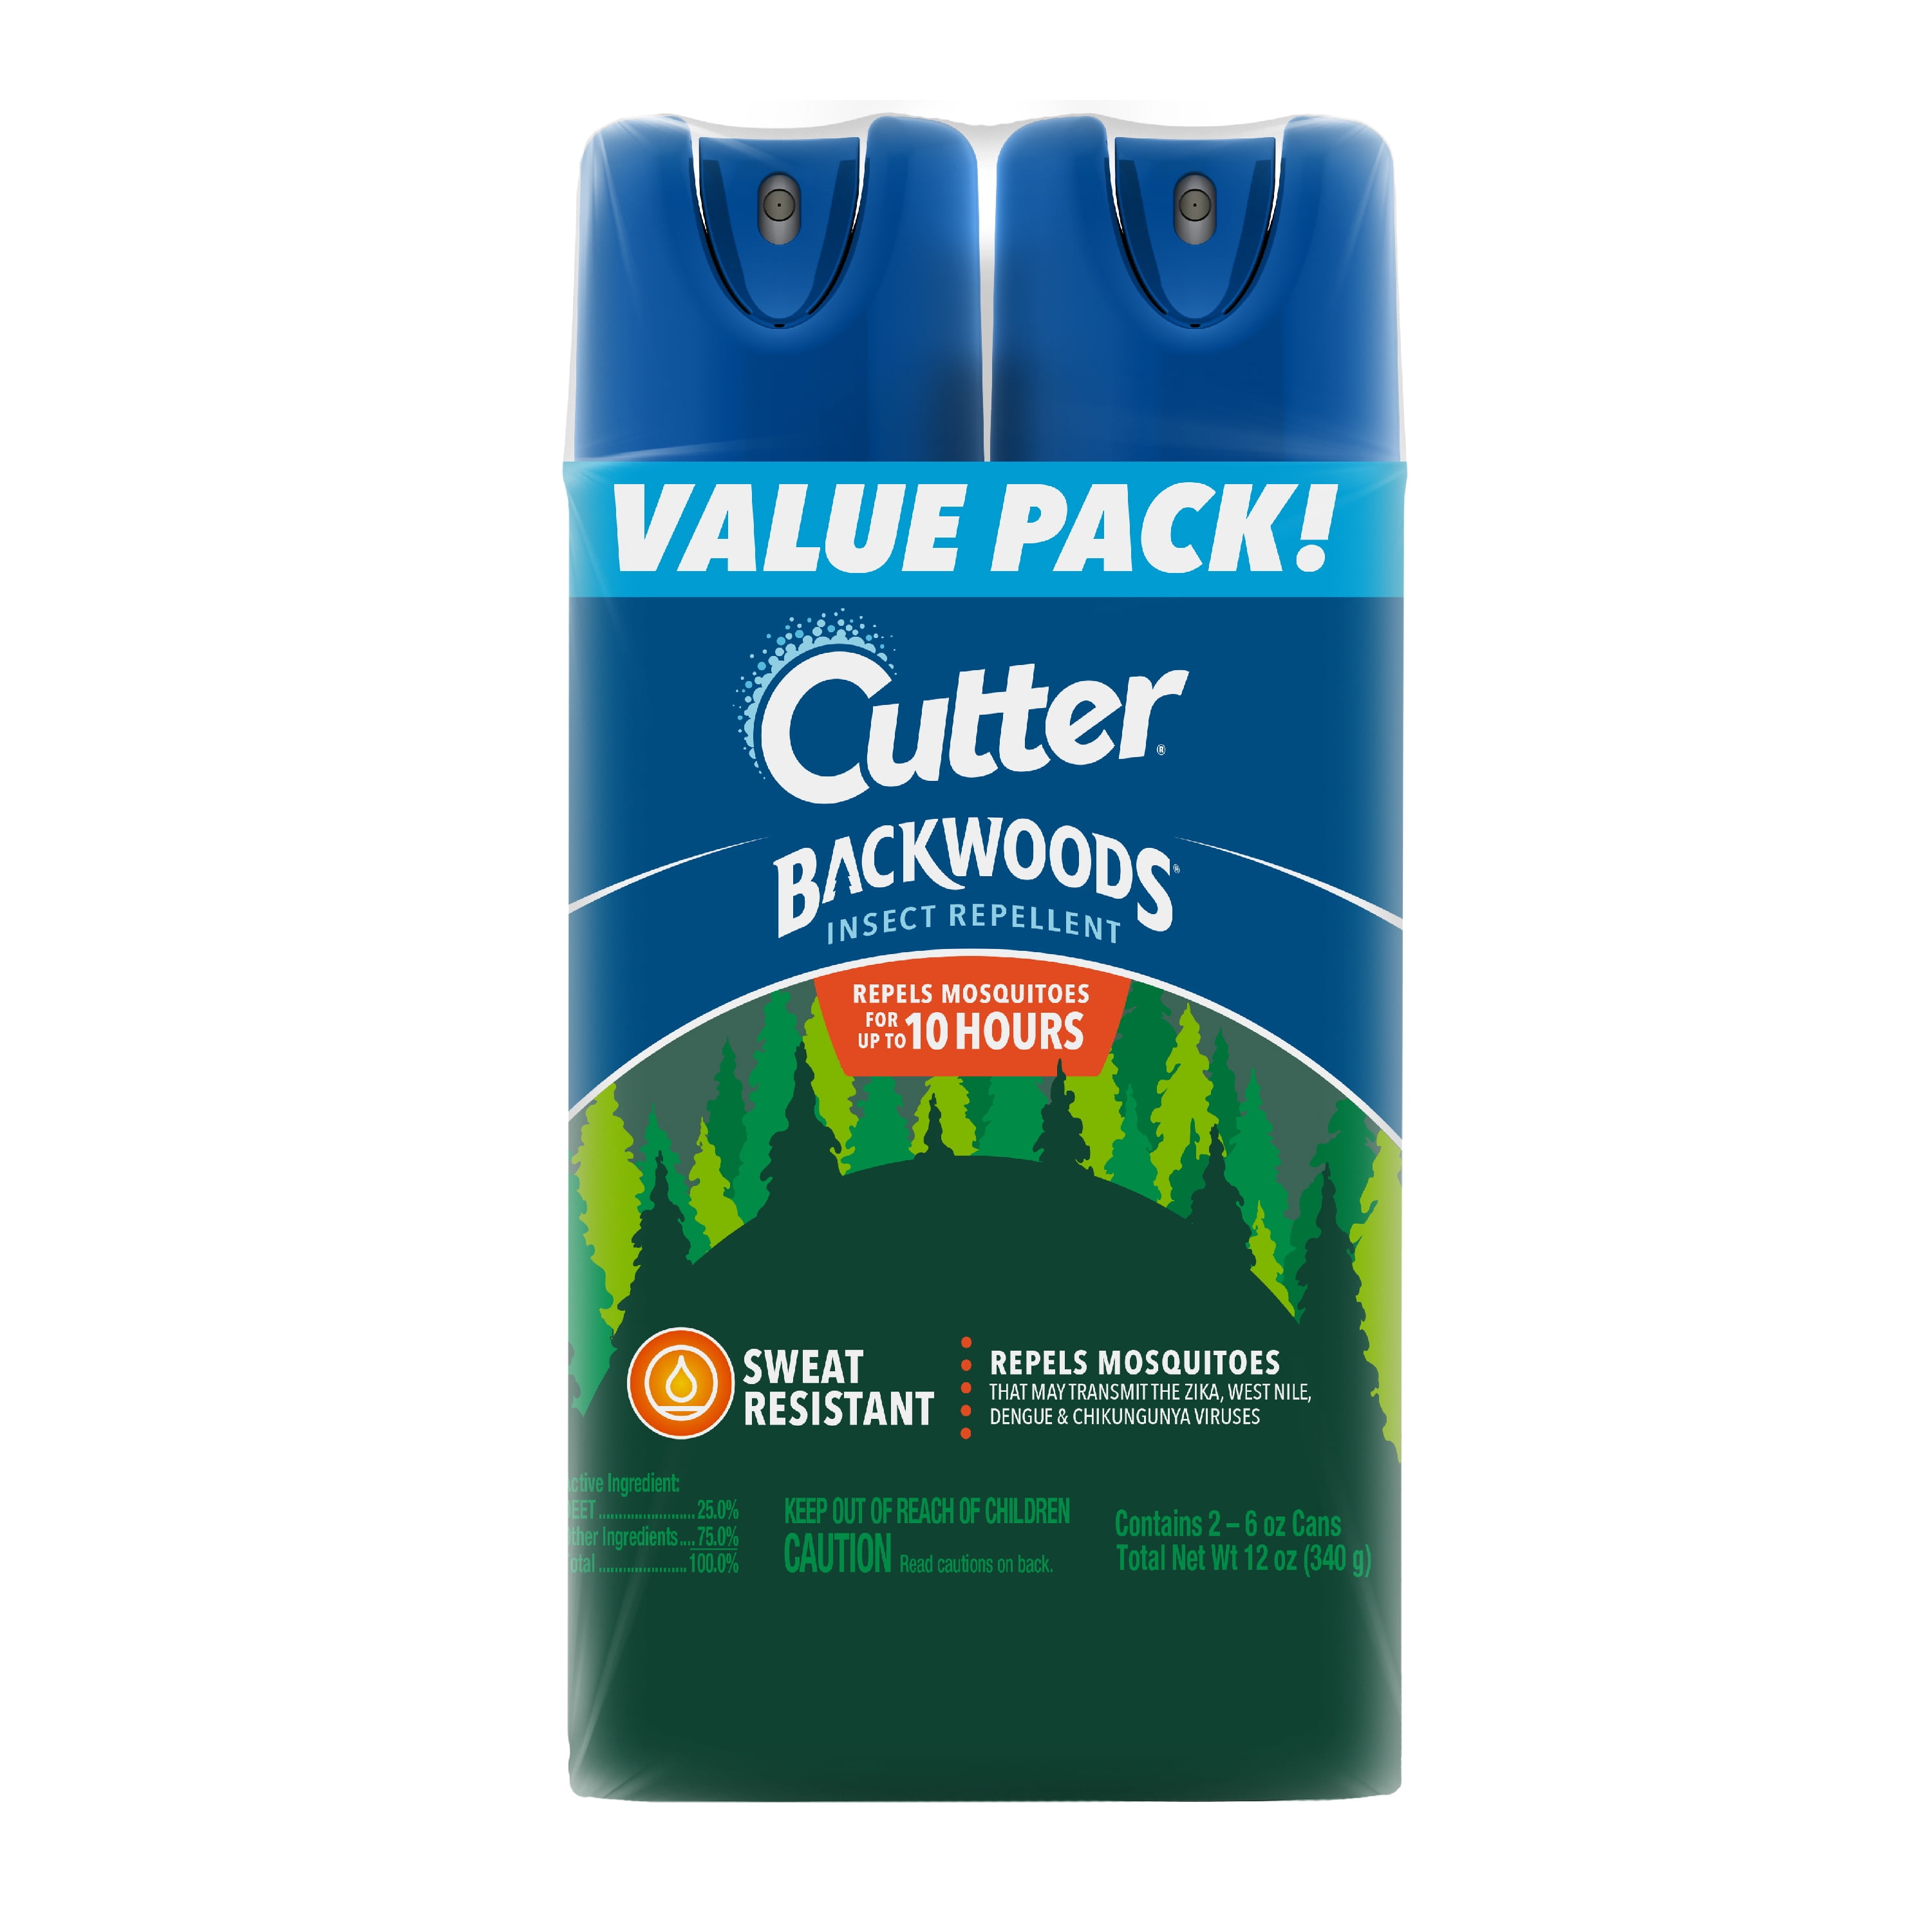 Cutter Backwoods High D.E.E.T Insect Repellent - Mosquito Protection